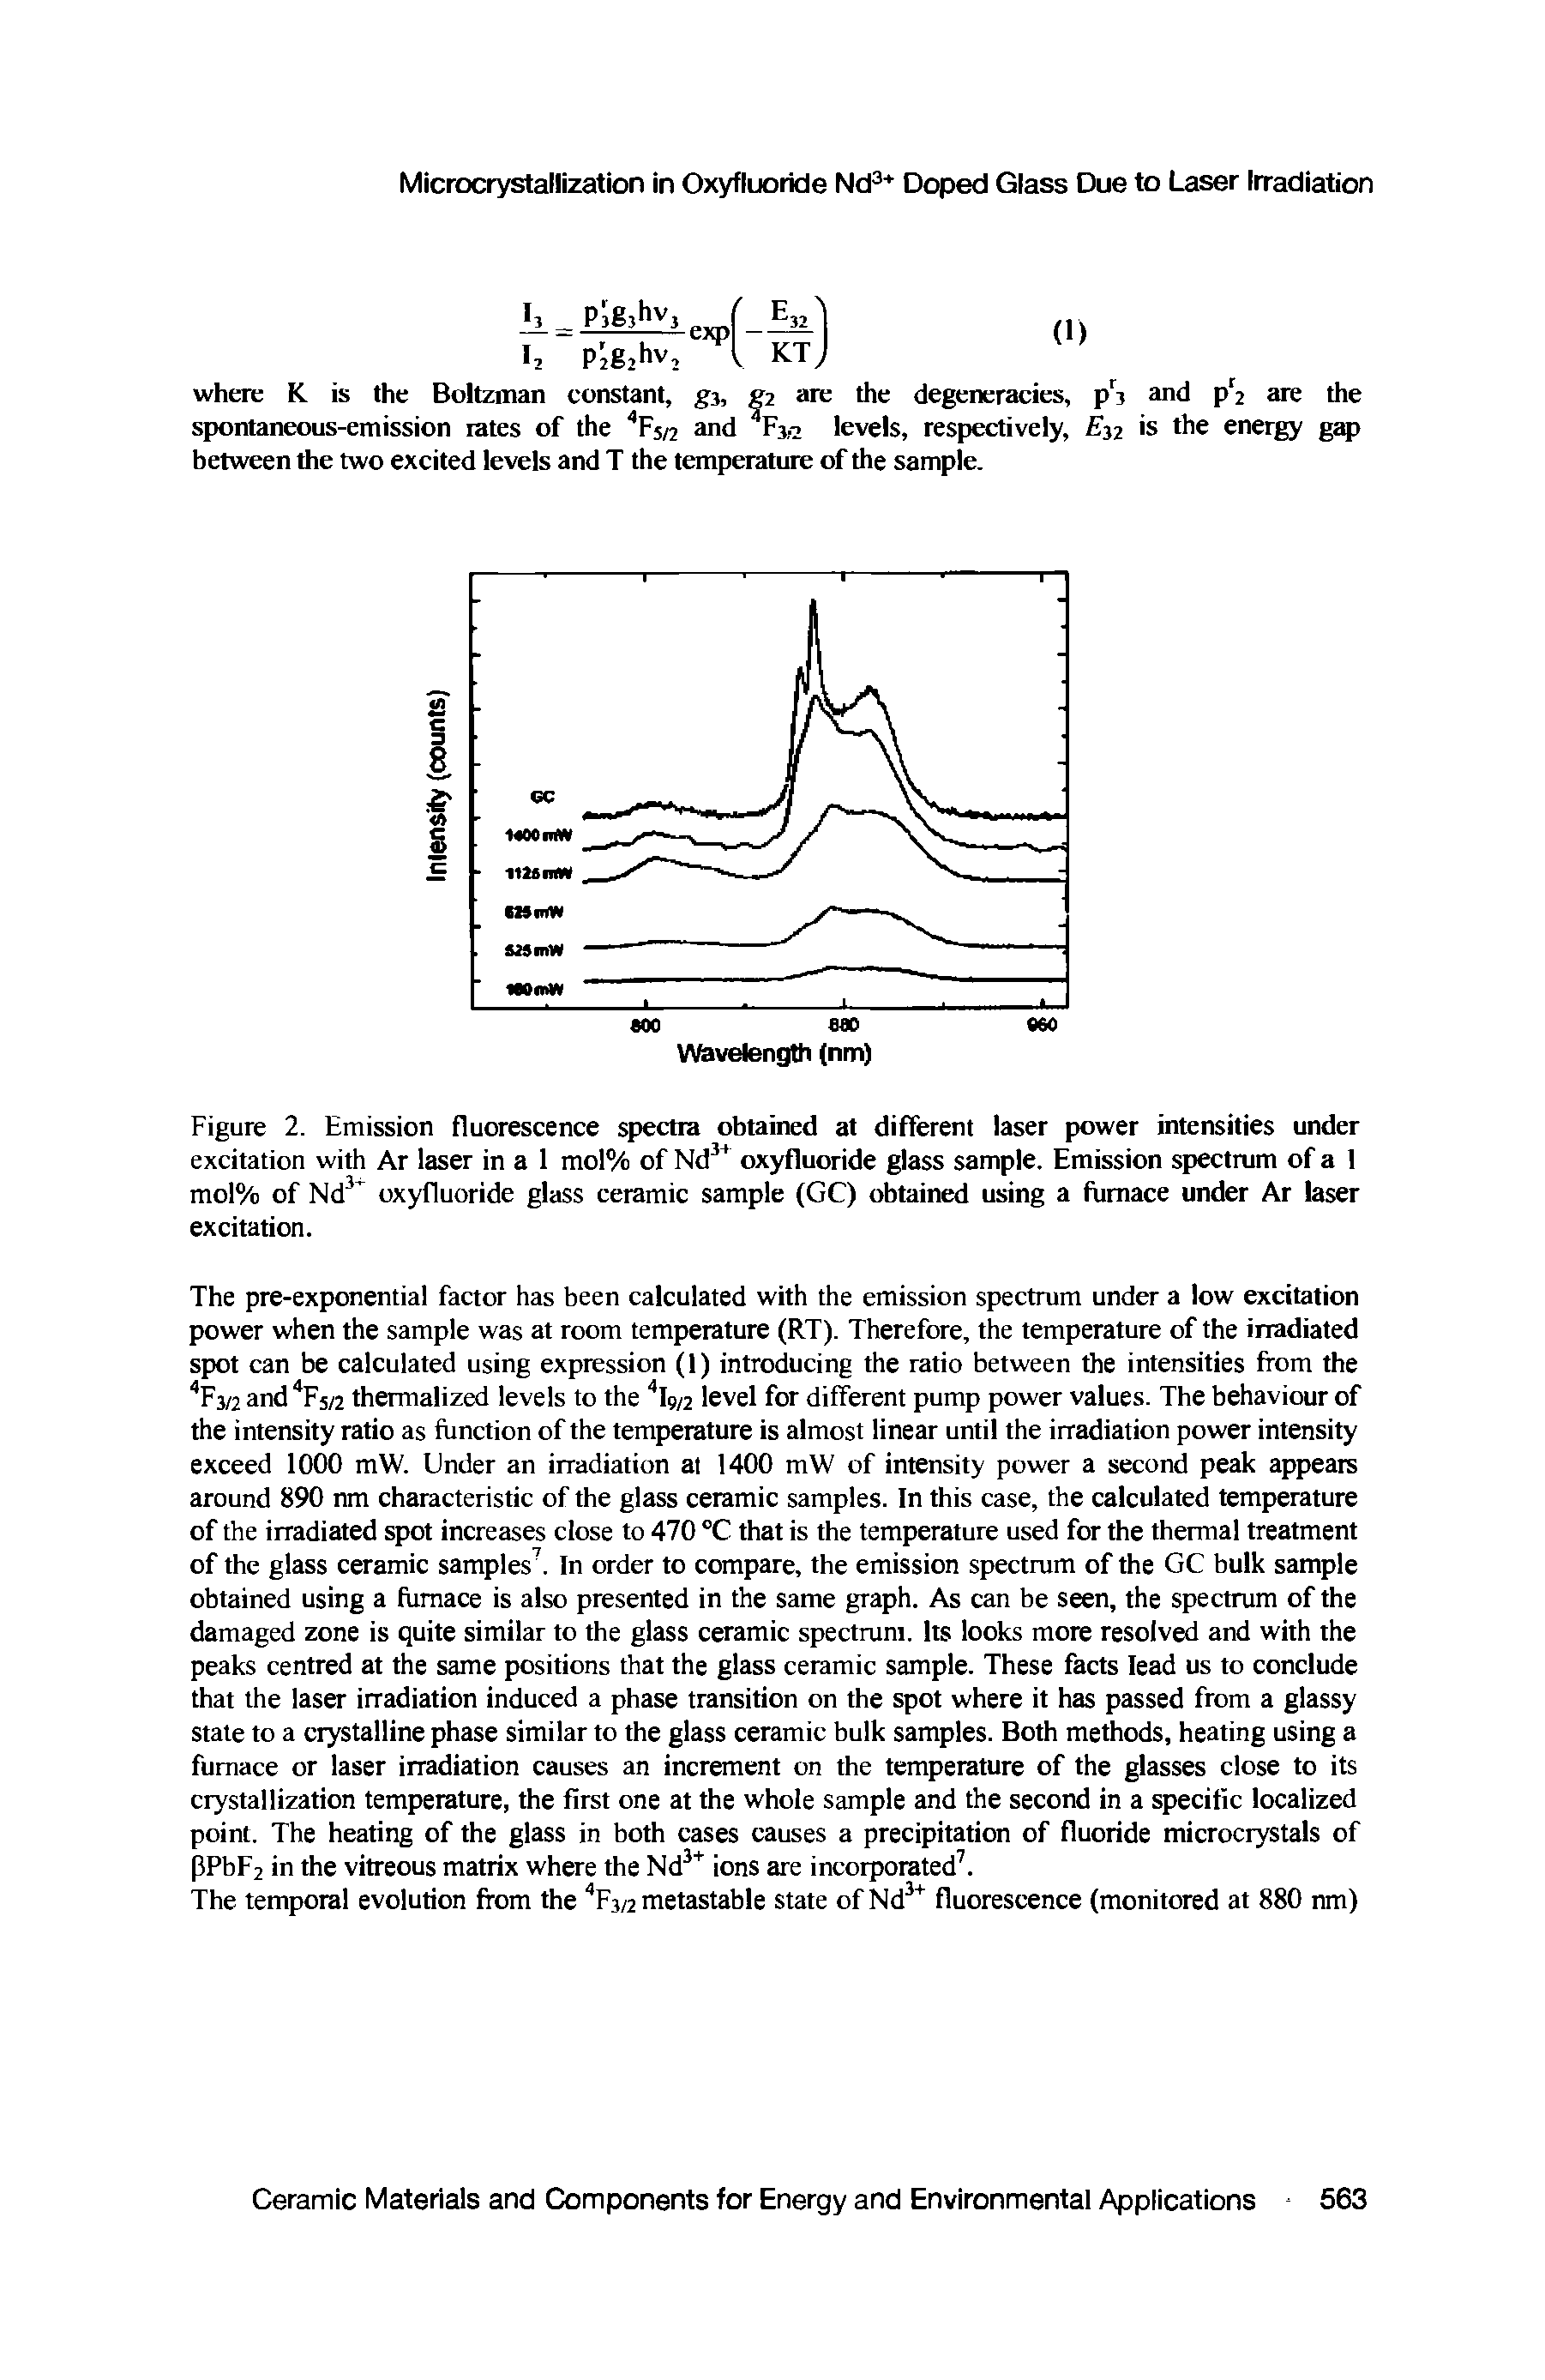 Figure 2. Emission fluorescence spectra obtained at different laser power intensities under excitation with Ar laser in a 1 mol% of Nd oxyfluoride glass sample. Emission spectrum of a 1 mol% of Nd " oxyfluoride glass ceramic sample (GC) obtained using a furnace under Ar laser excitation.